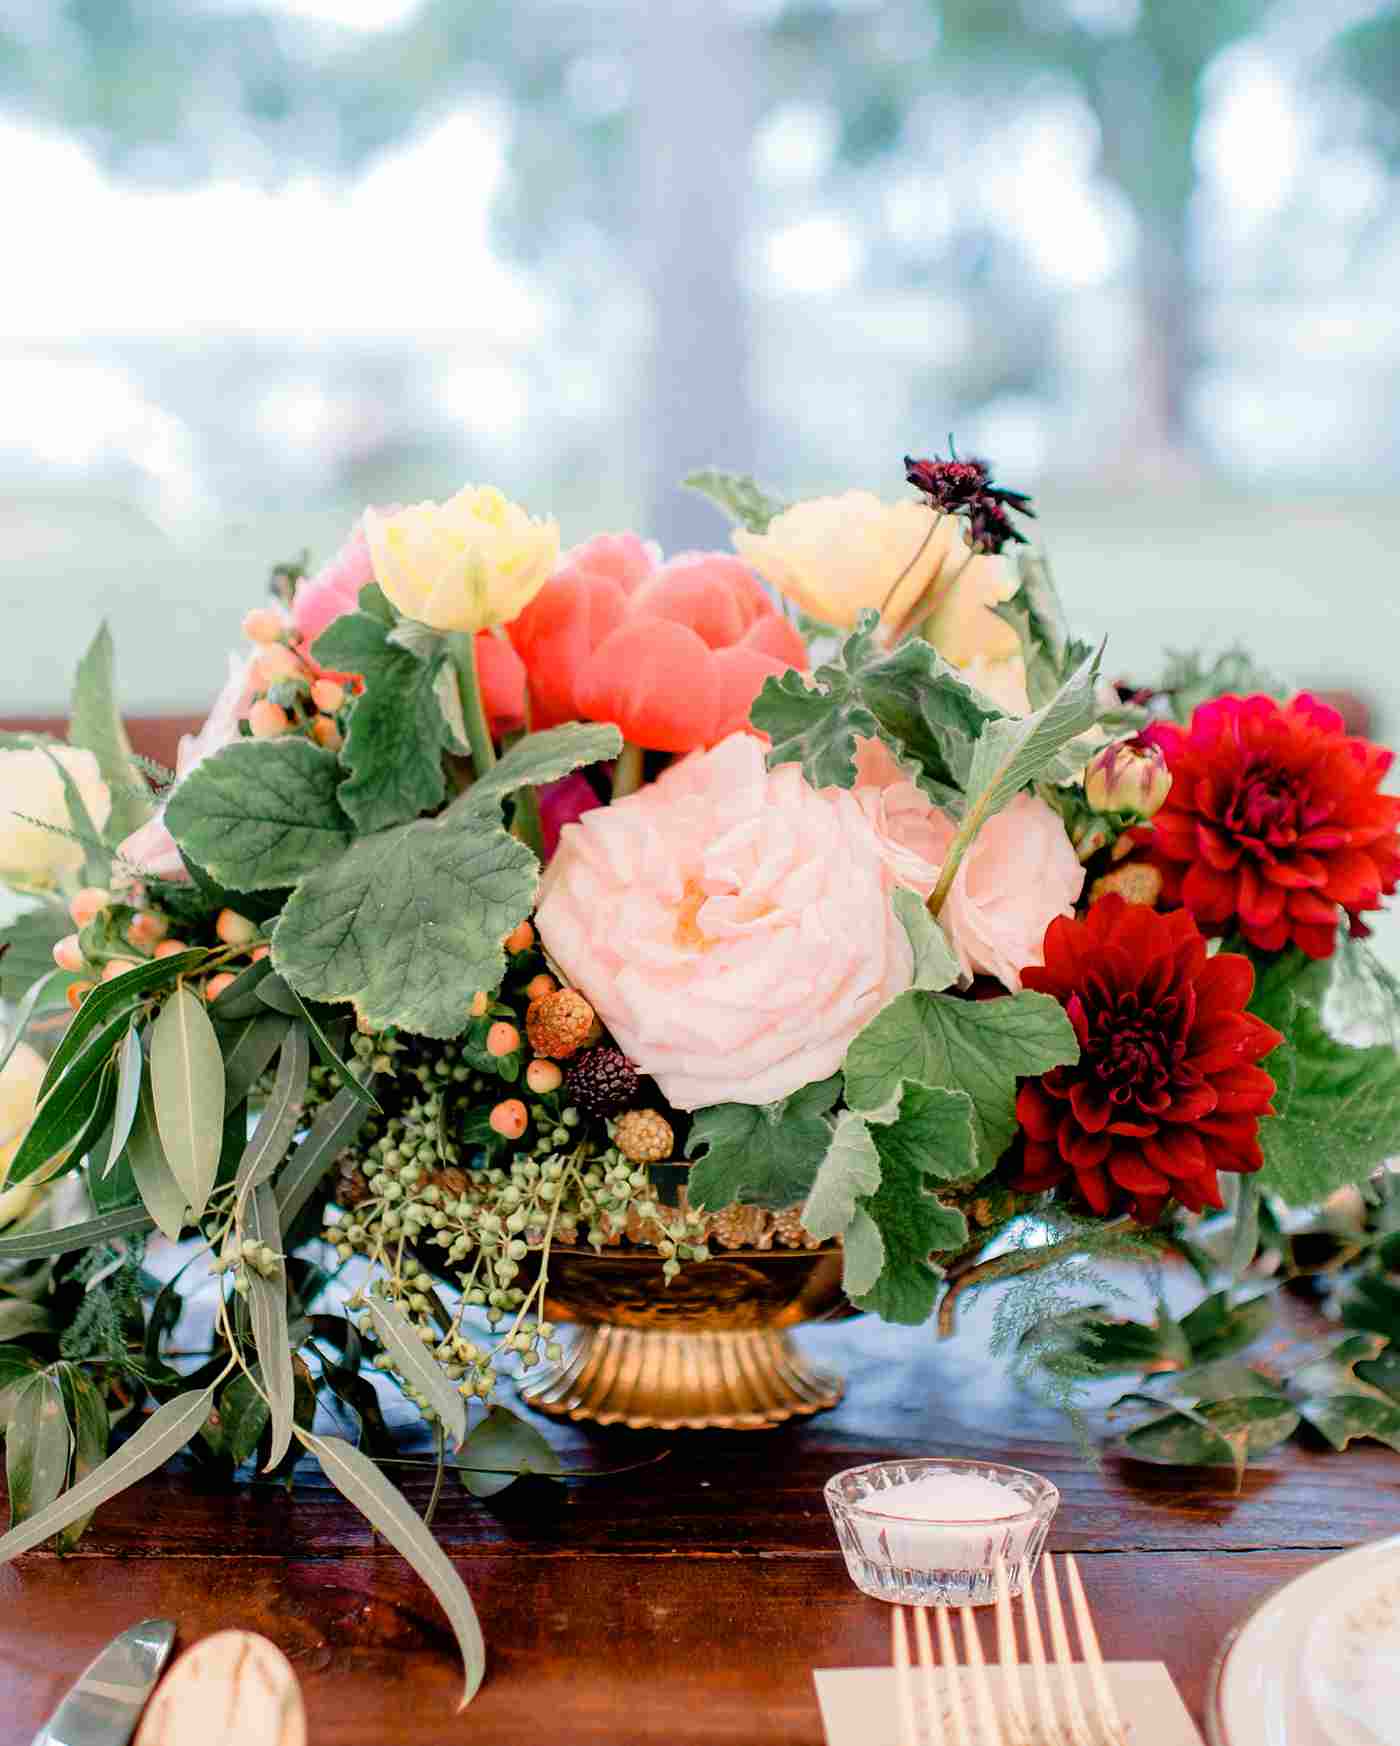 red autumn deco with seasonal flowers pink roses and red dahlias and pink peonies with ornamental grasses and deciduous leaves in a vintage golden vase